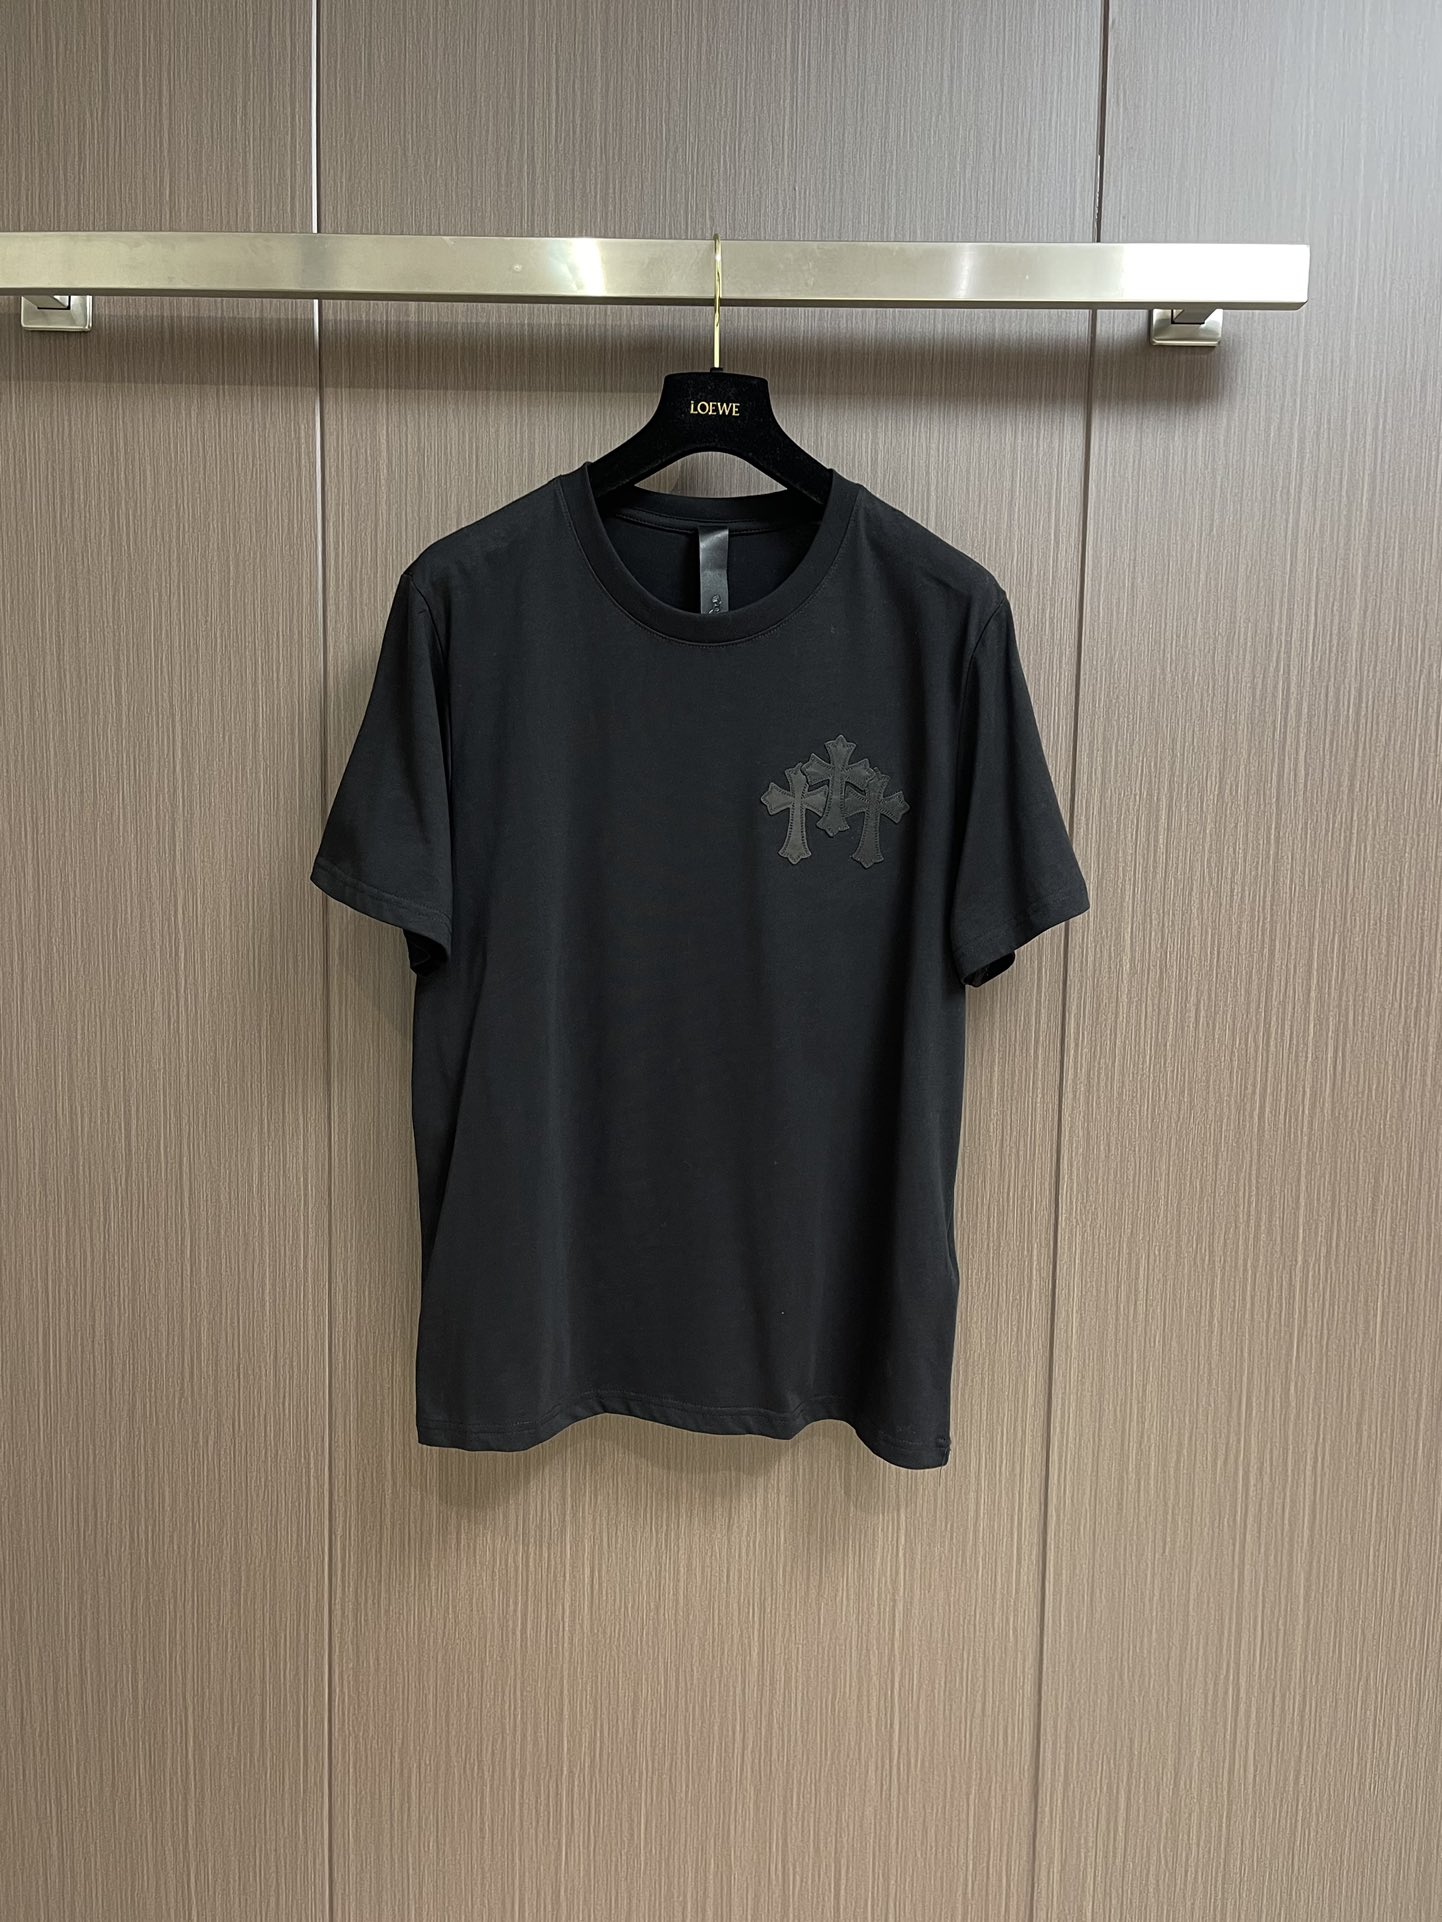 Chrome Hearts Clothing T-Shirt Counter Quality
 Cotton Short Sleeve